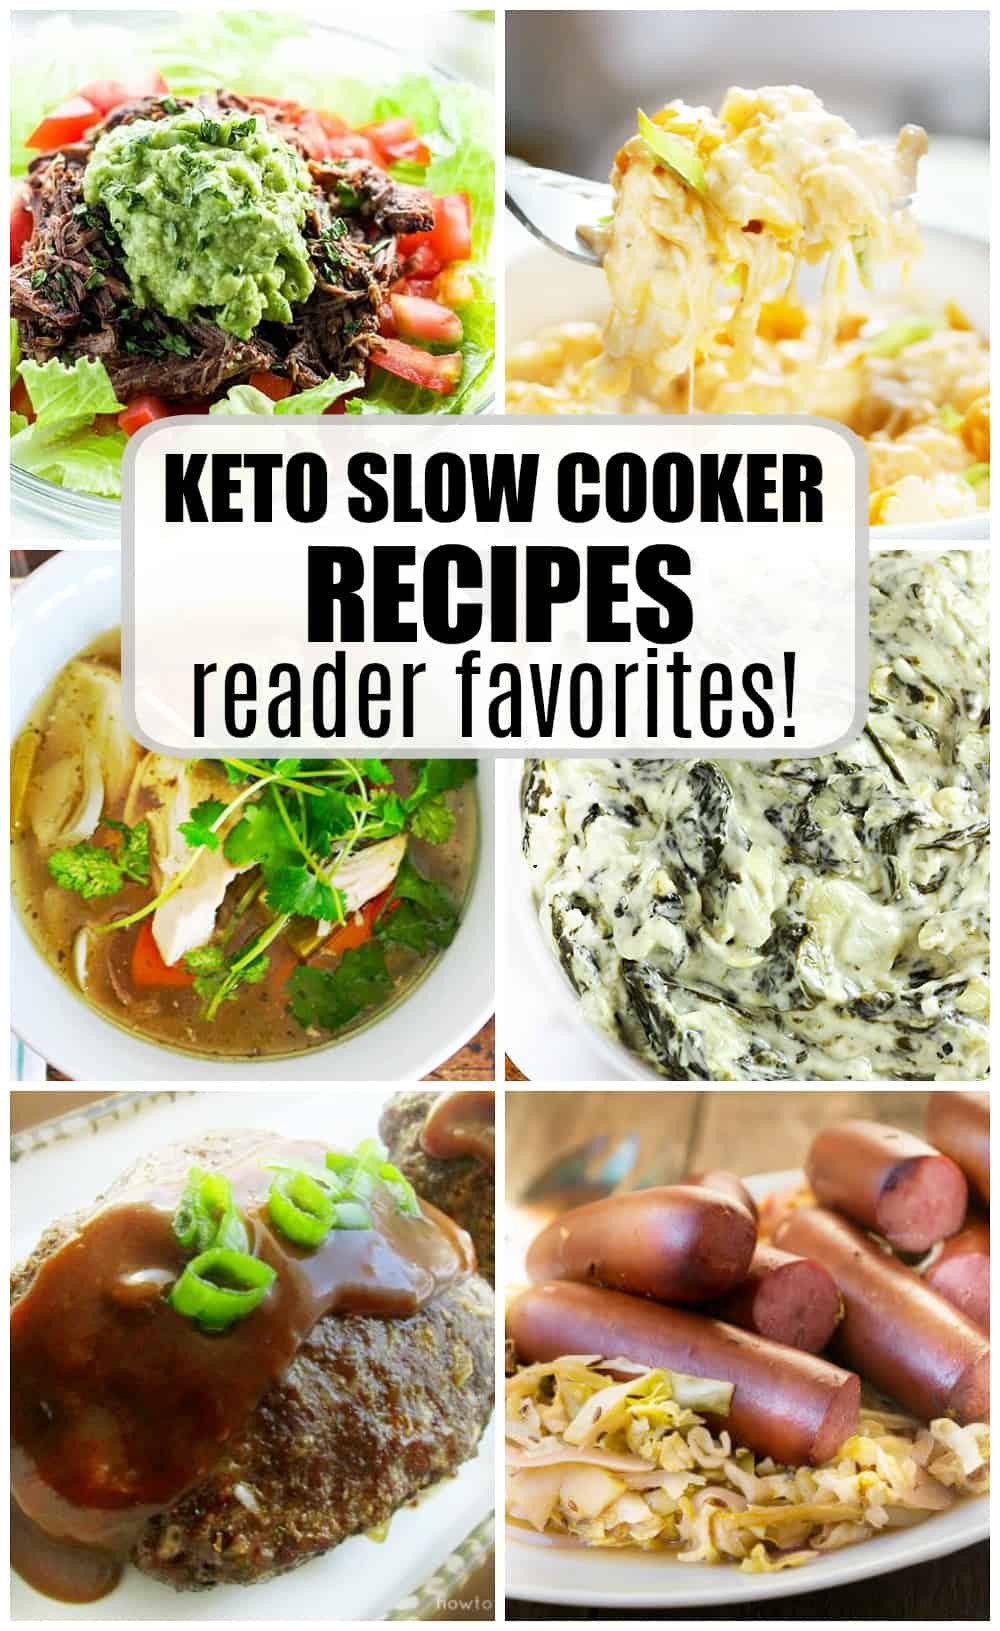 Slow Cooker Keto Recipes Videos
 KETO Slow Cooker Recipes Low Carb High Fat Some of the Best